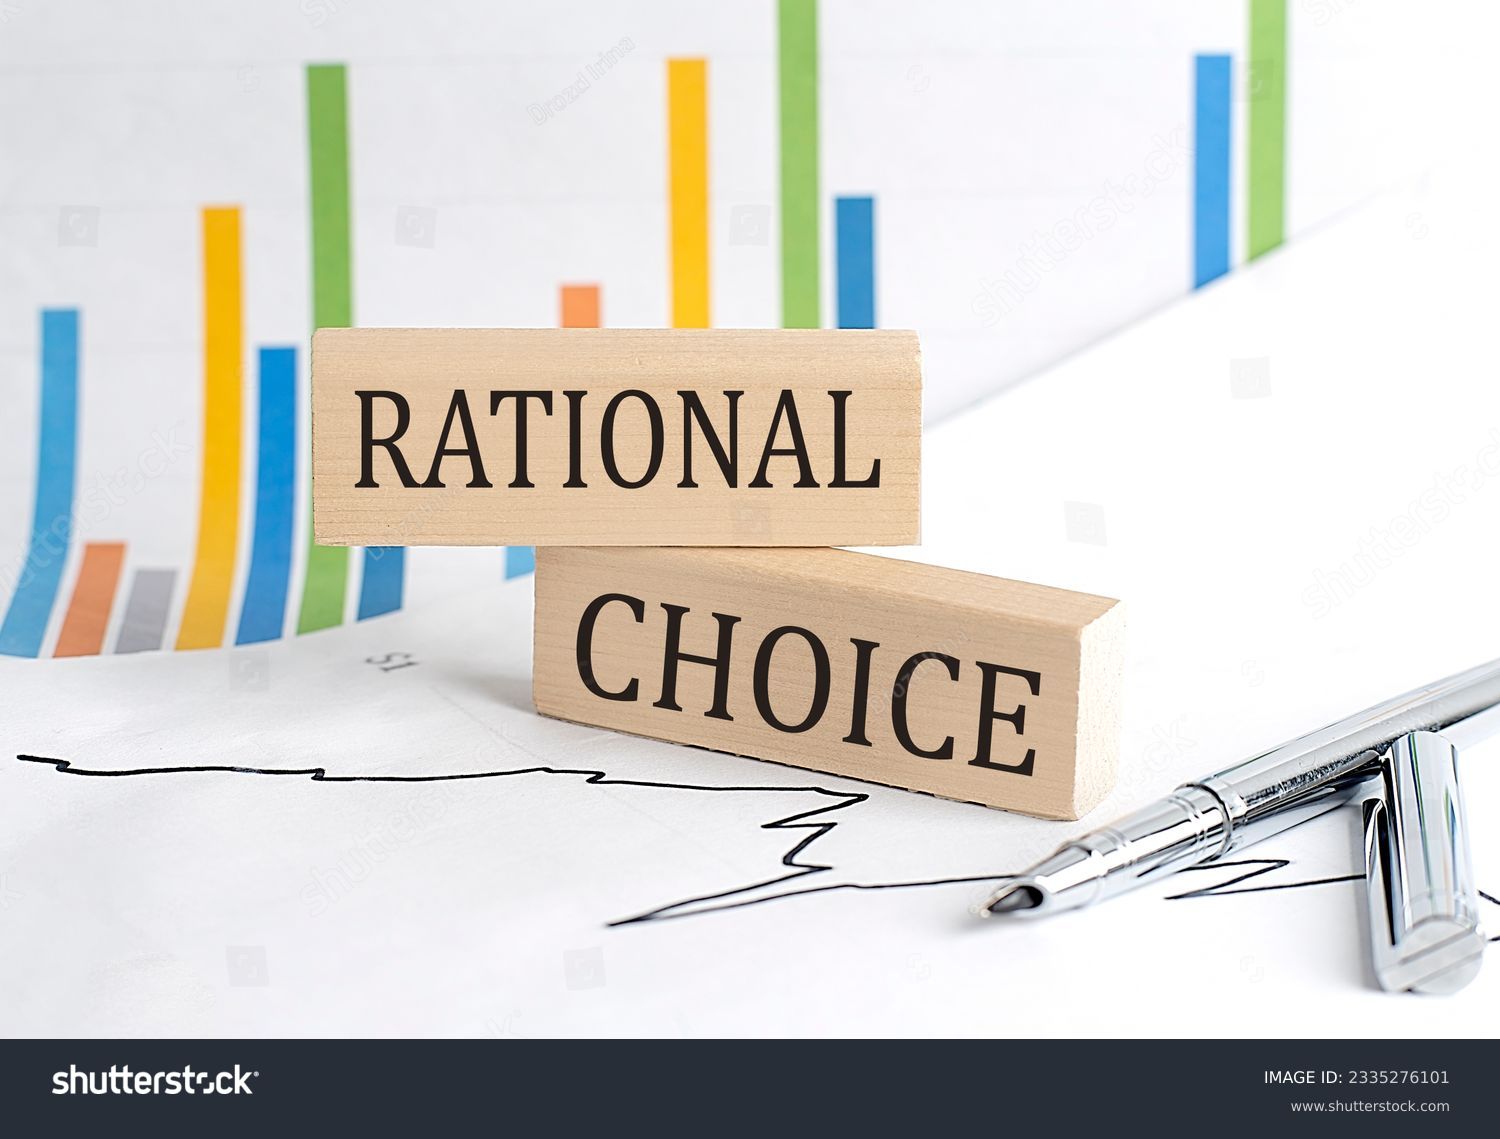 RATIONAL CHOICE text on wooden block on chart background, business concept #2335276101